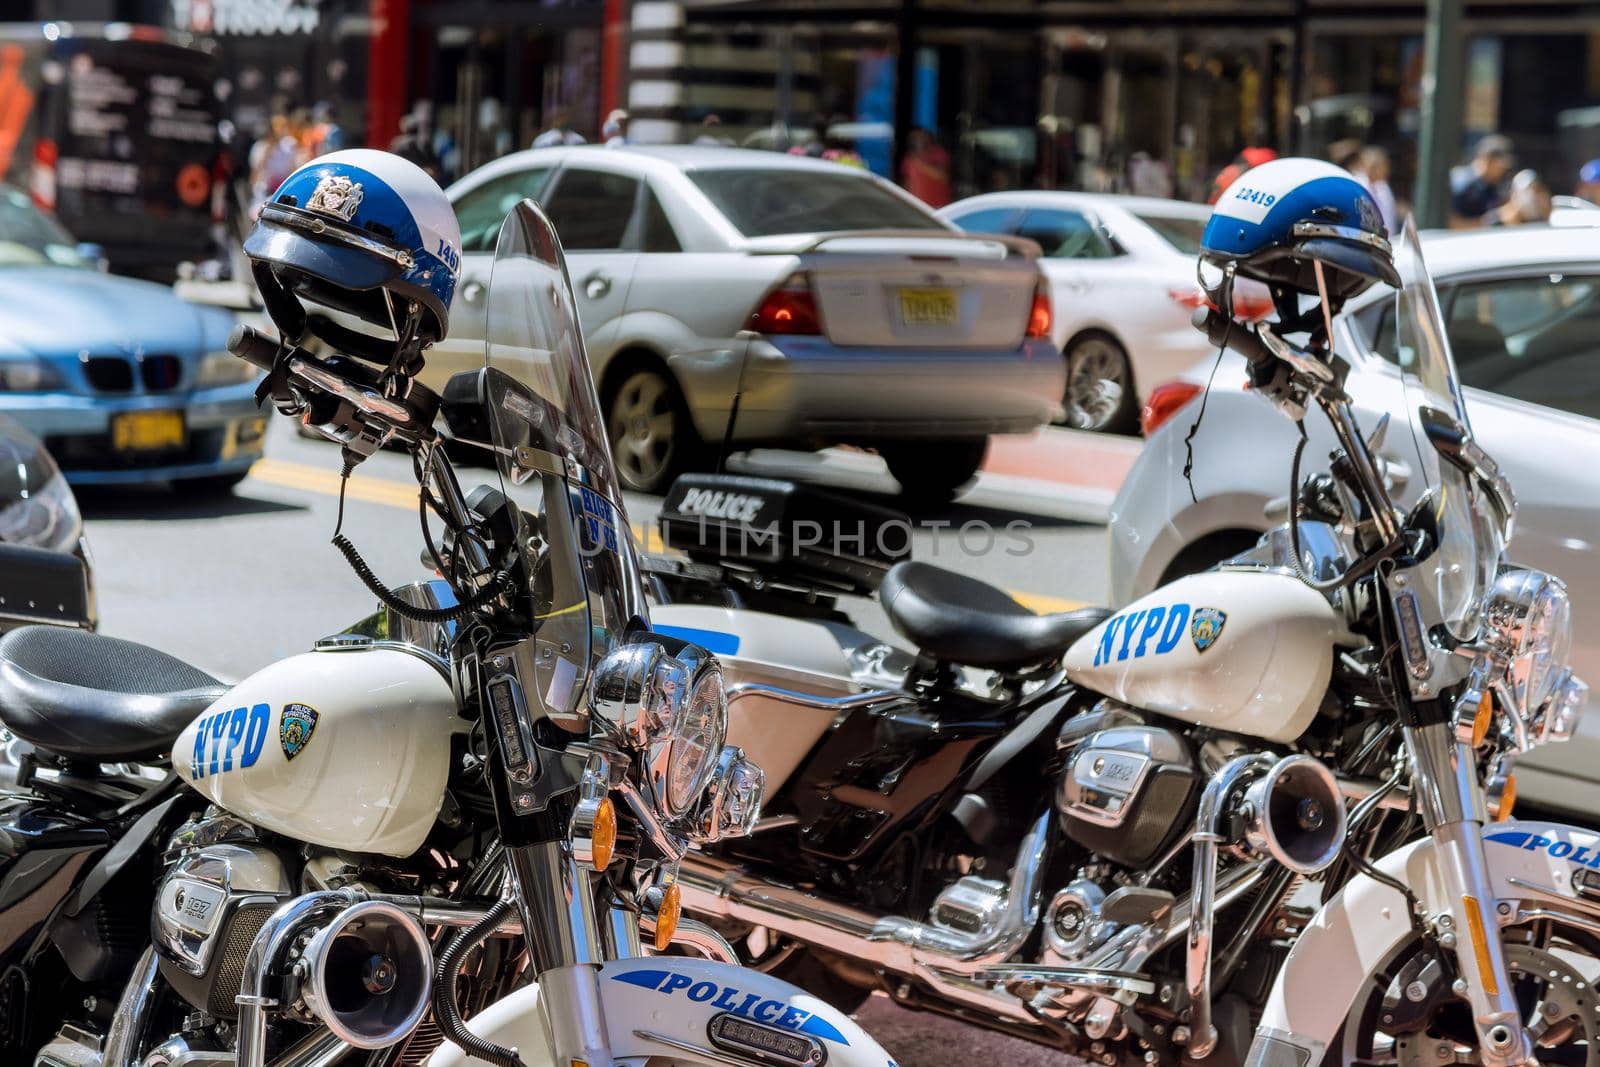 NYPD Patrol motorcycles parked on the New York City near Time Square, Manhattan by ungvar